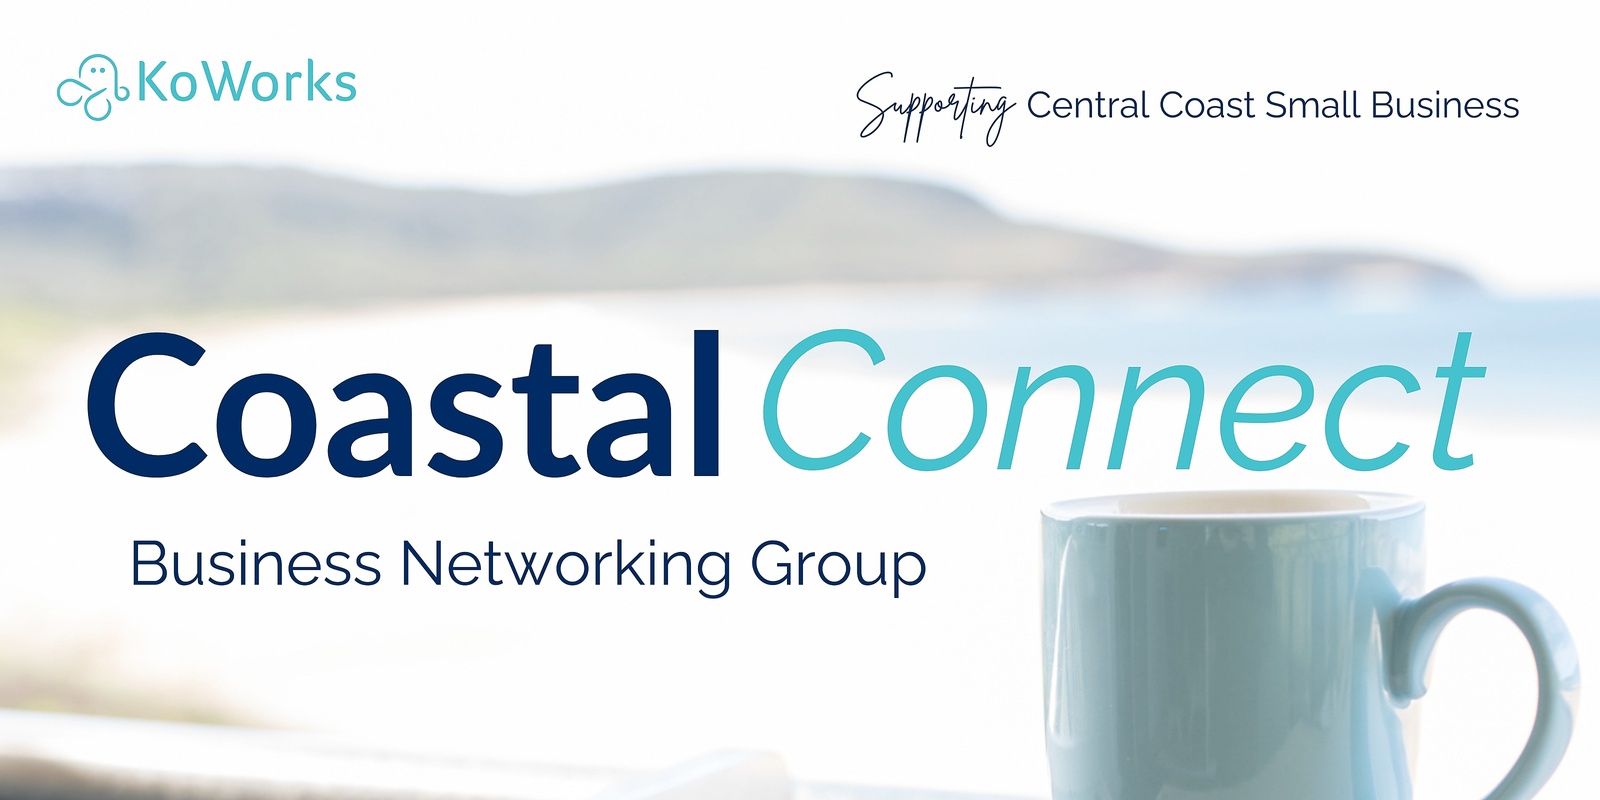 Banner image for Coastal Connect | Business Networking Group Supporting Central Coast Small Business